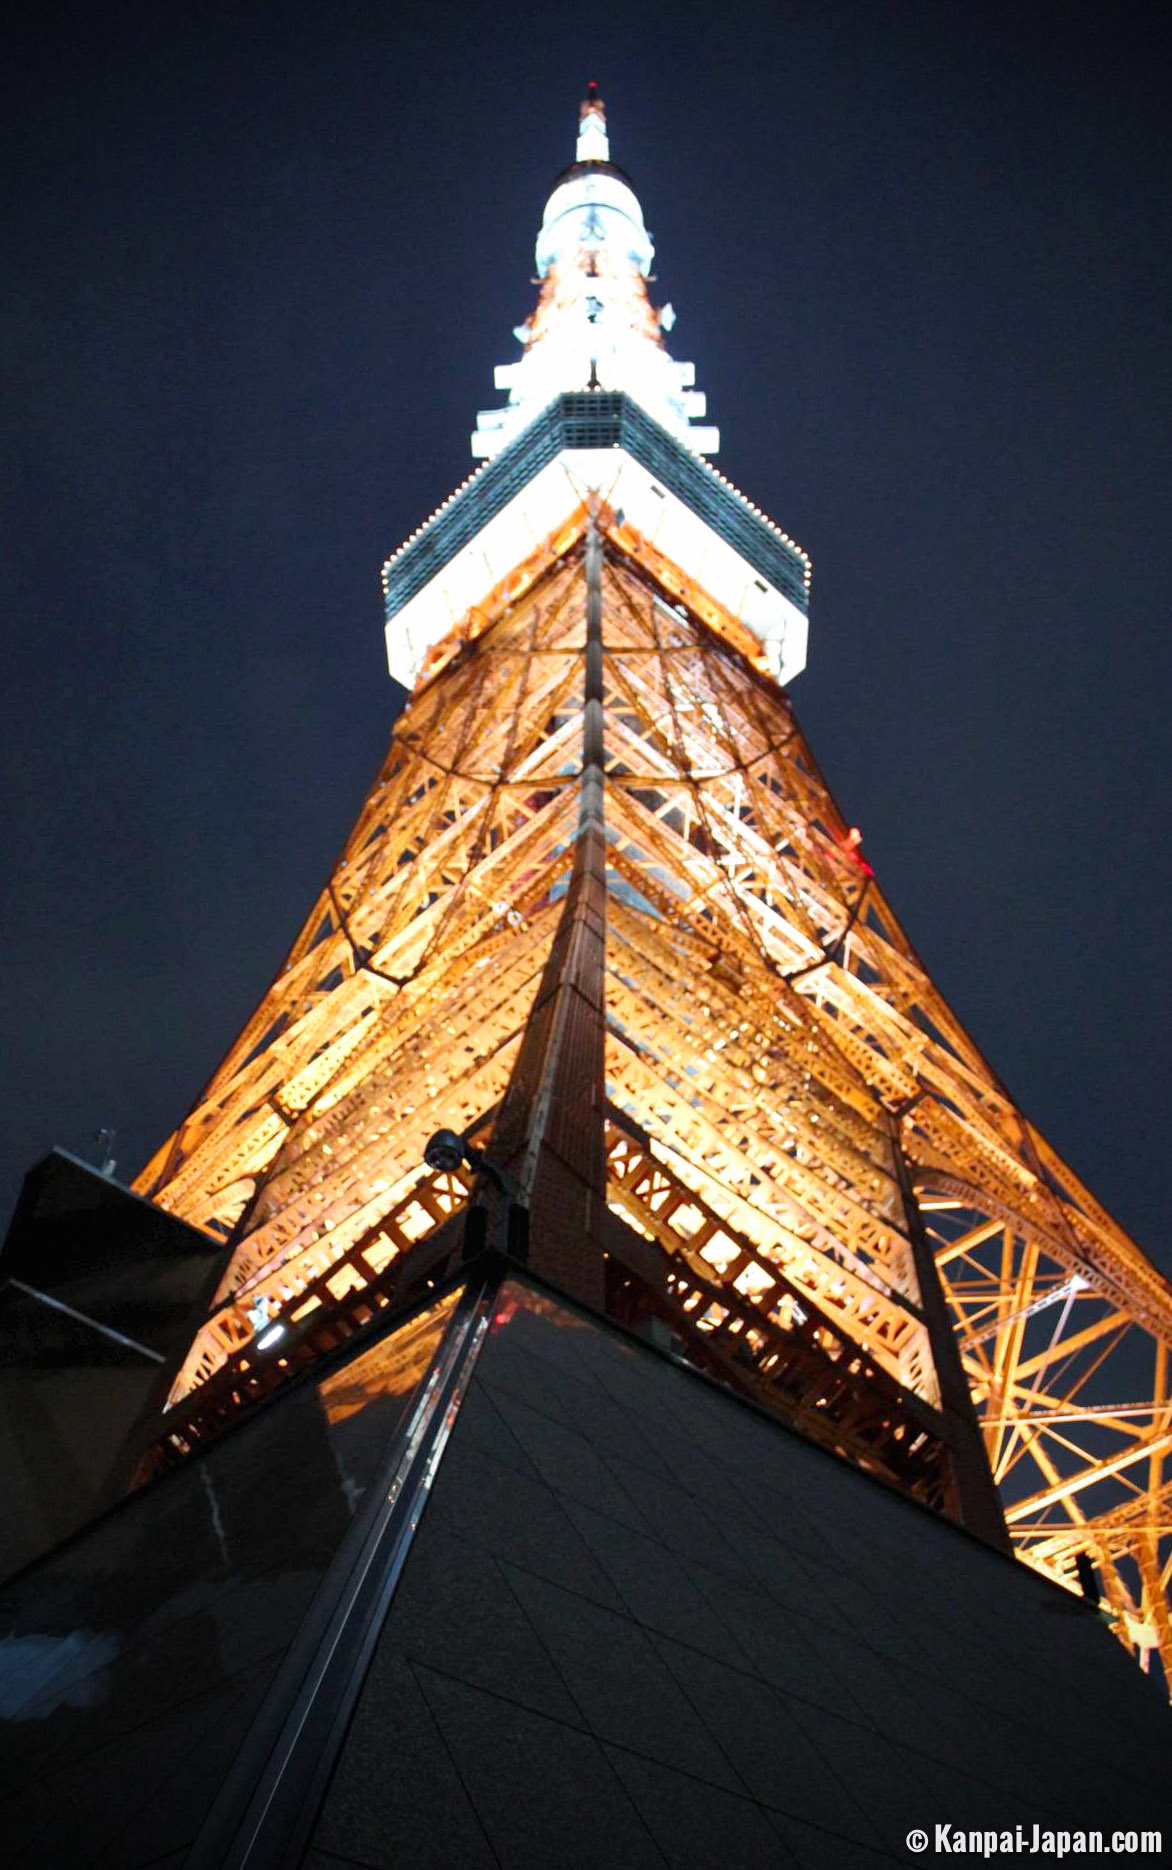 Tokyo Tower - The Japanese Eiffel Tower